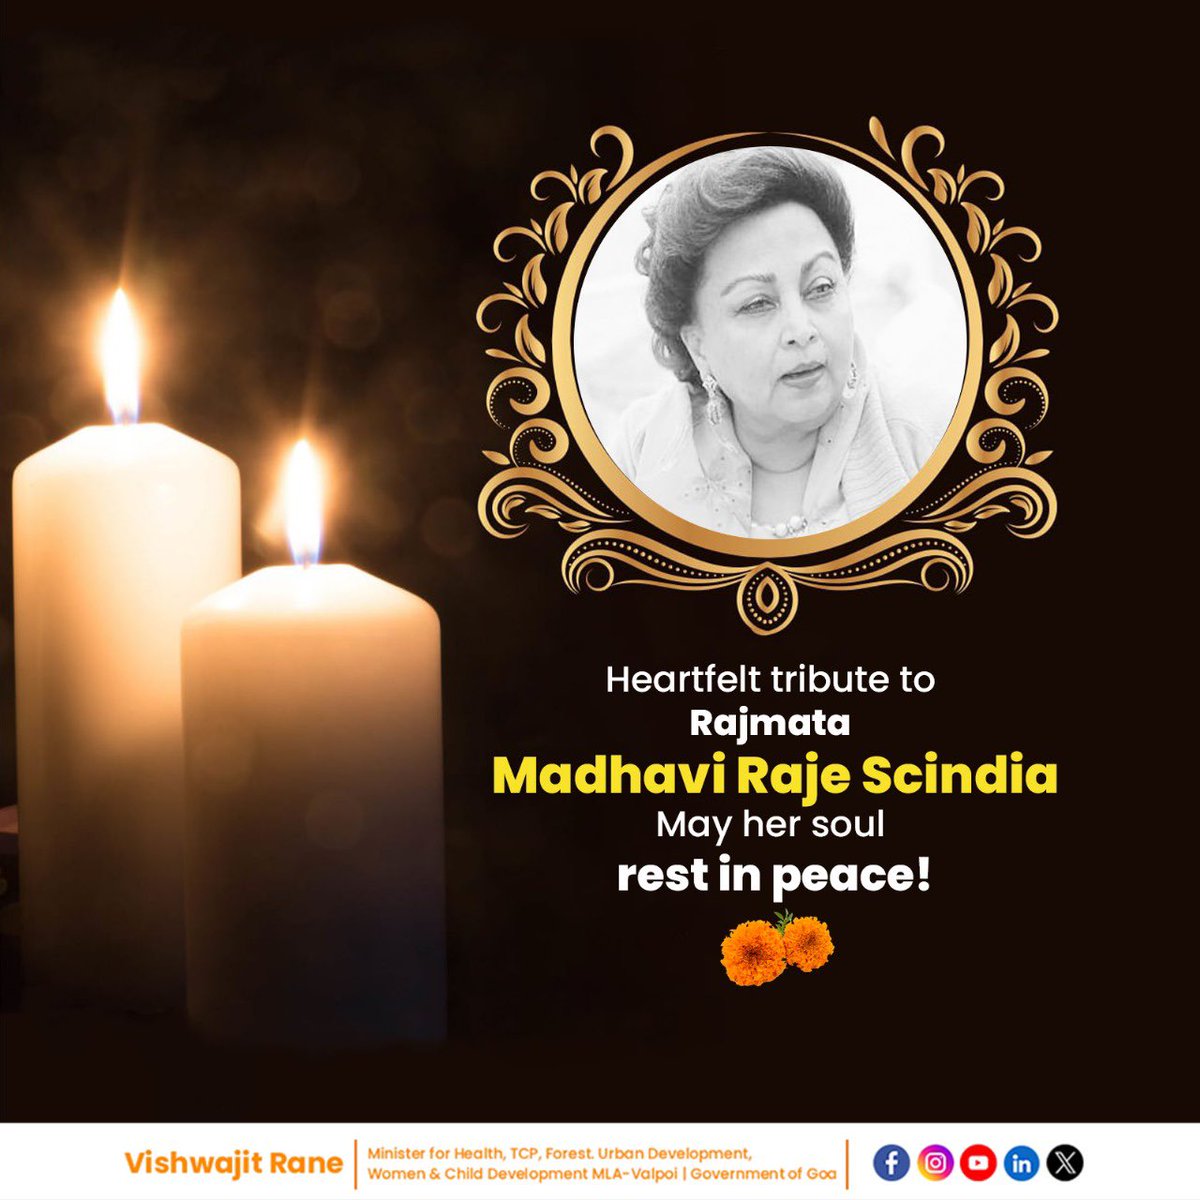 Saddened by the news of Rajmata Madhavi Raje Scindia's passing. May her soul rest in peace, and my thoughts are with her family during this difficult time.